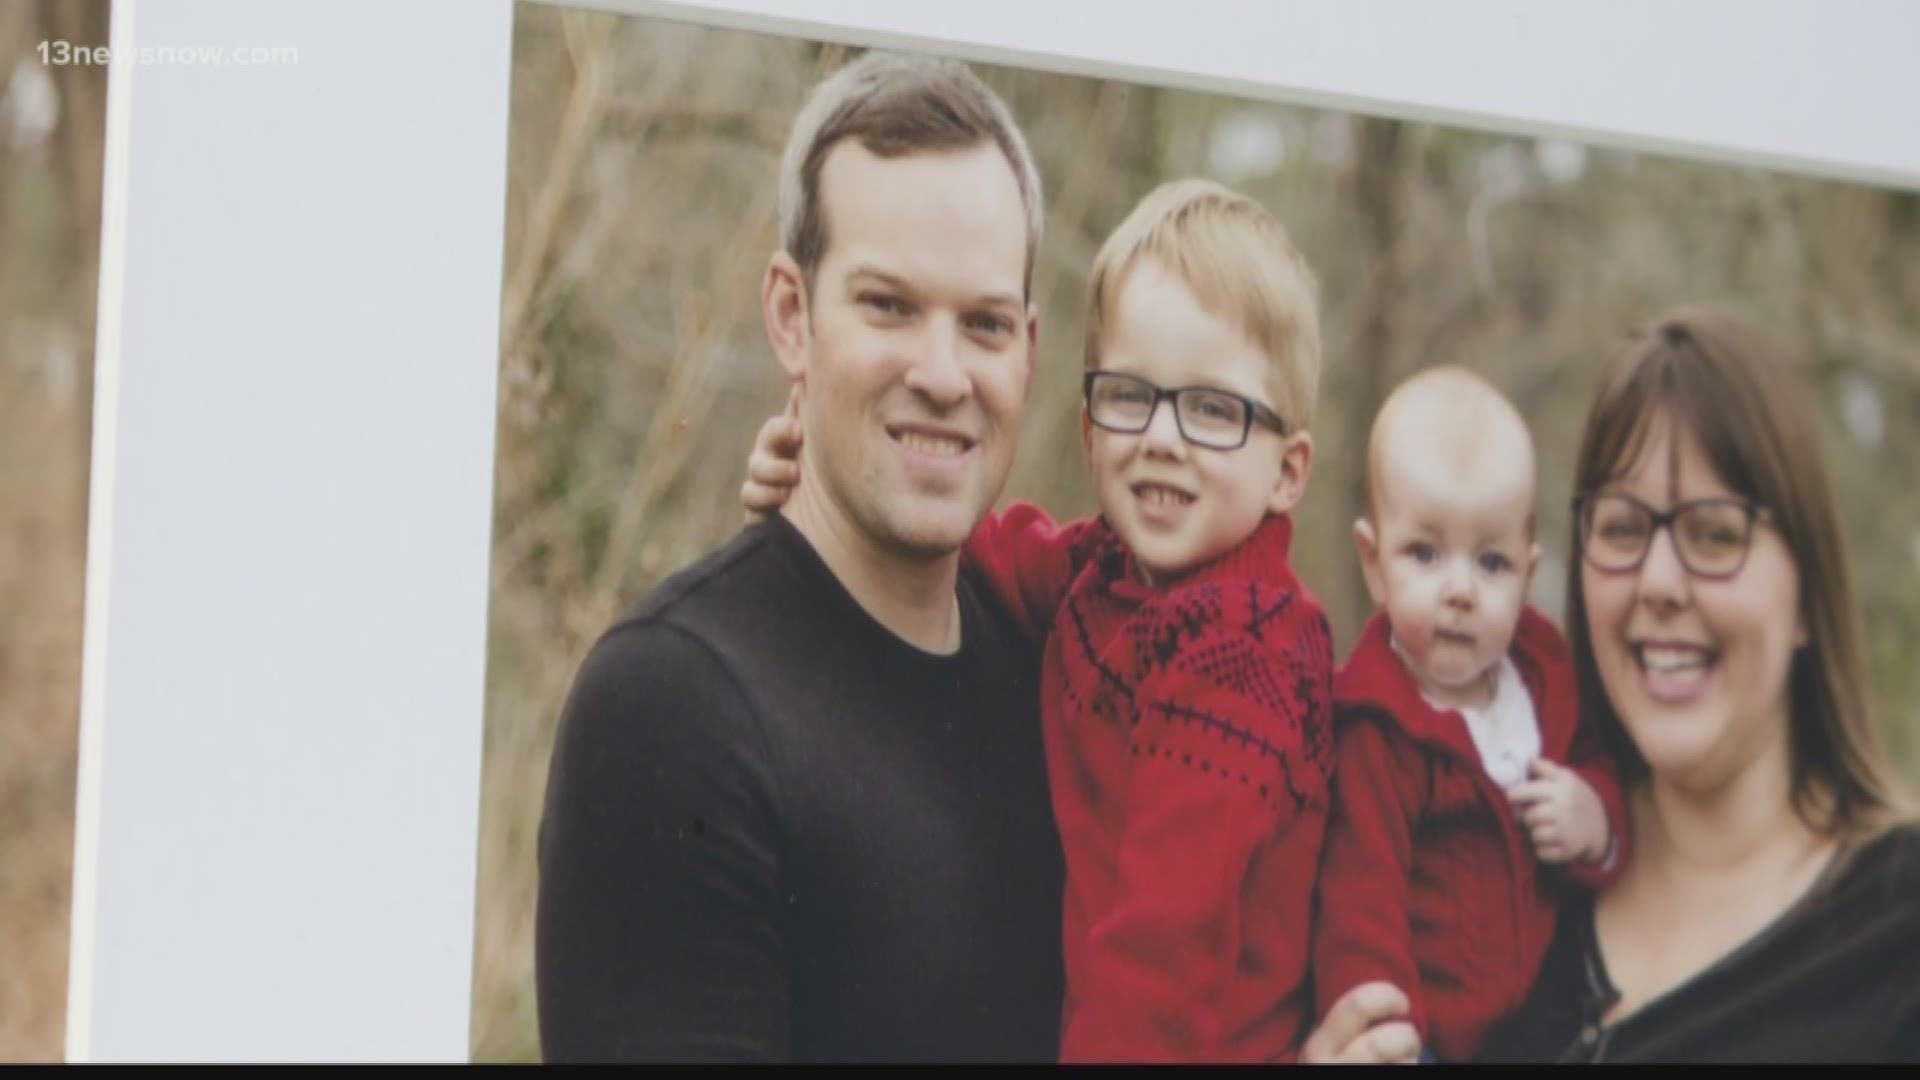 A Family of a Norfolk police officer is leaning on their faith to get through a painful time.